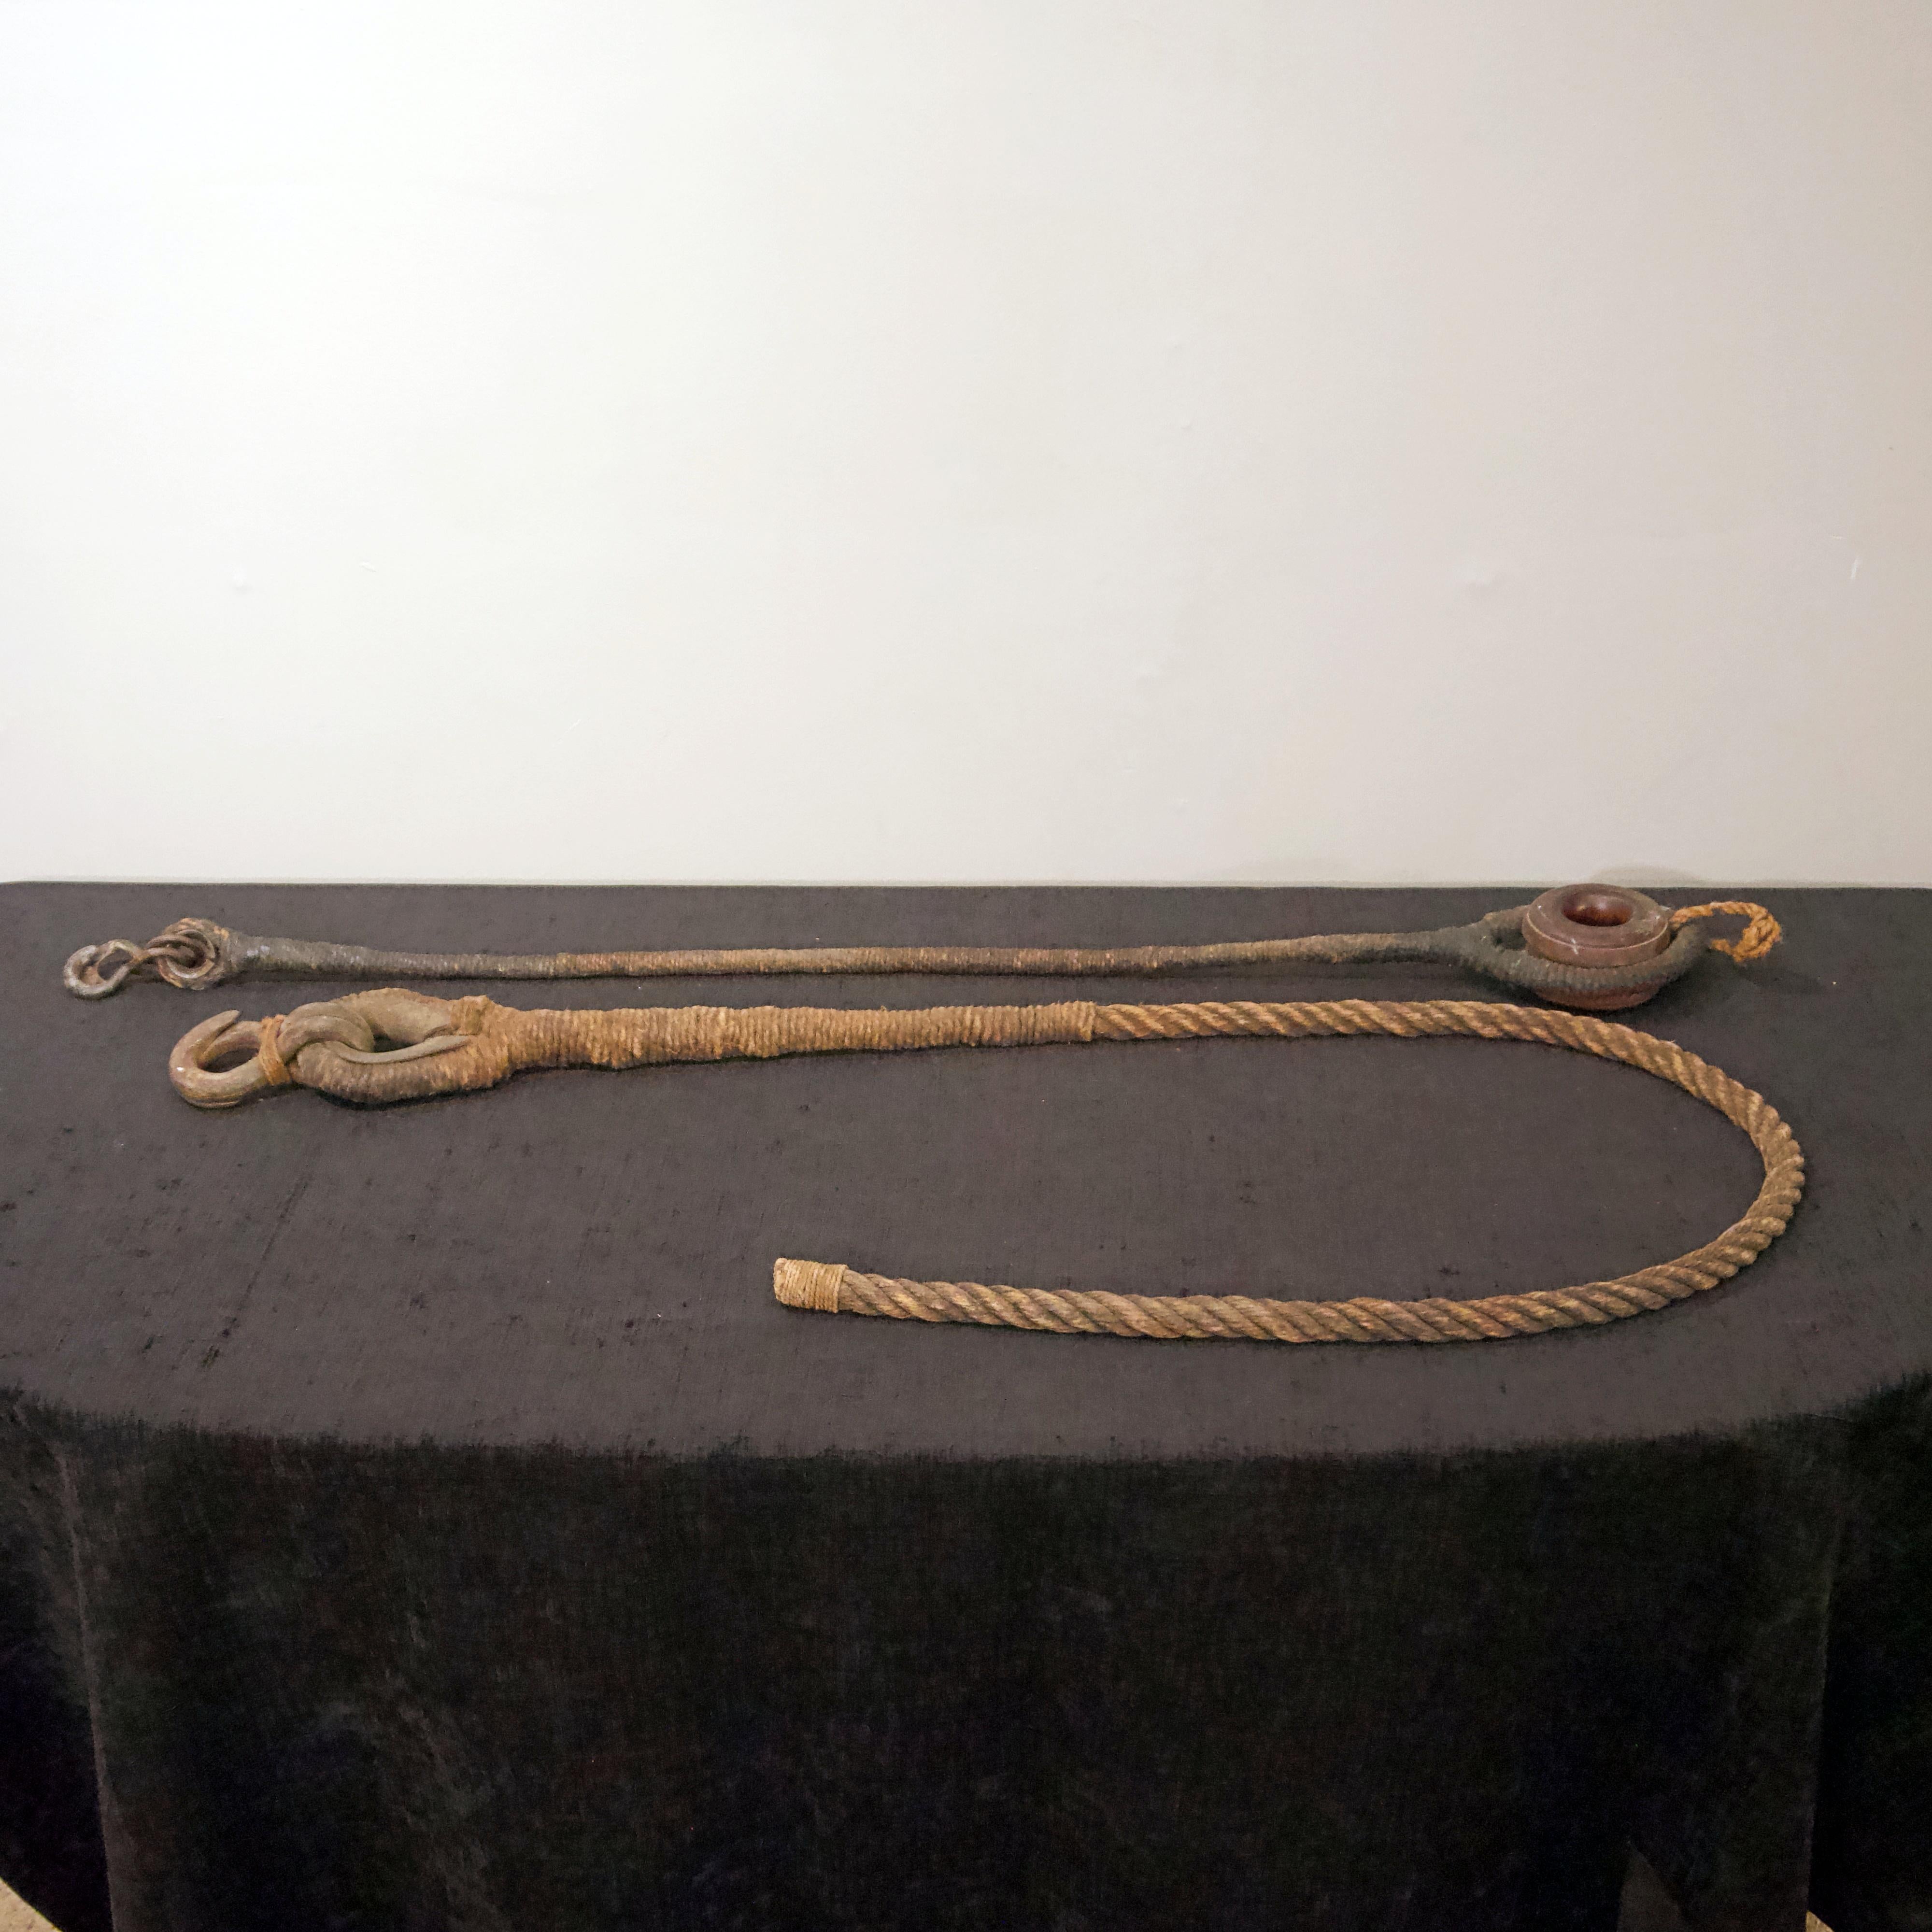 Tools ropes and tackle for 19th century waling vessel.